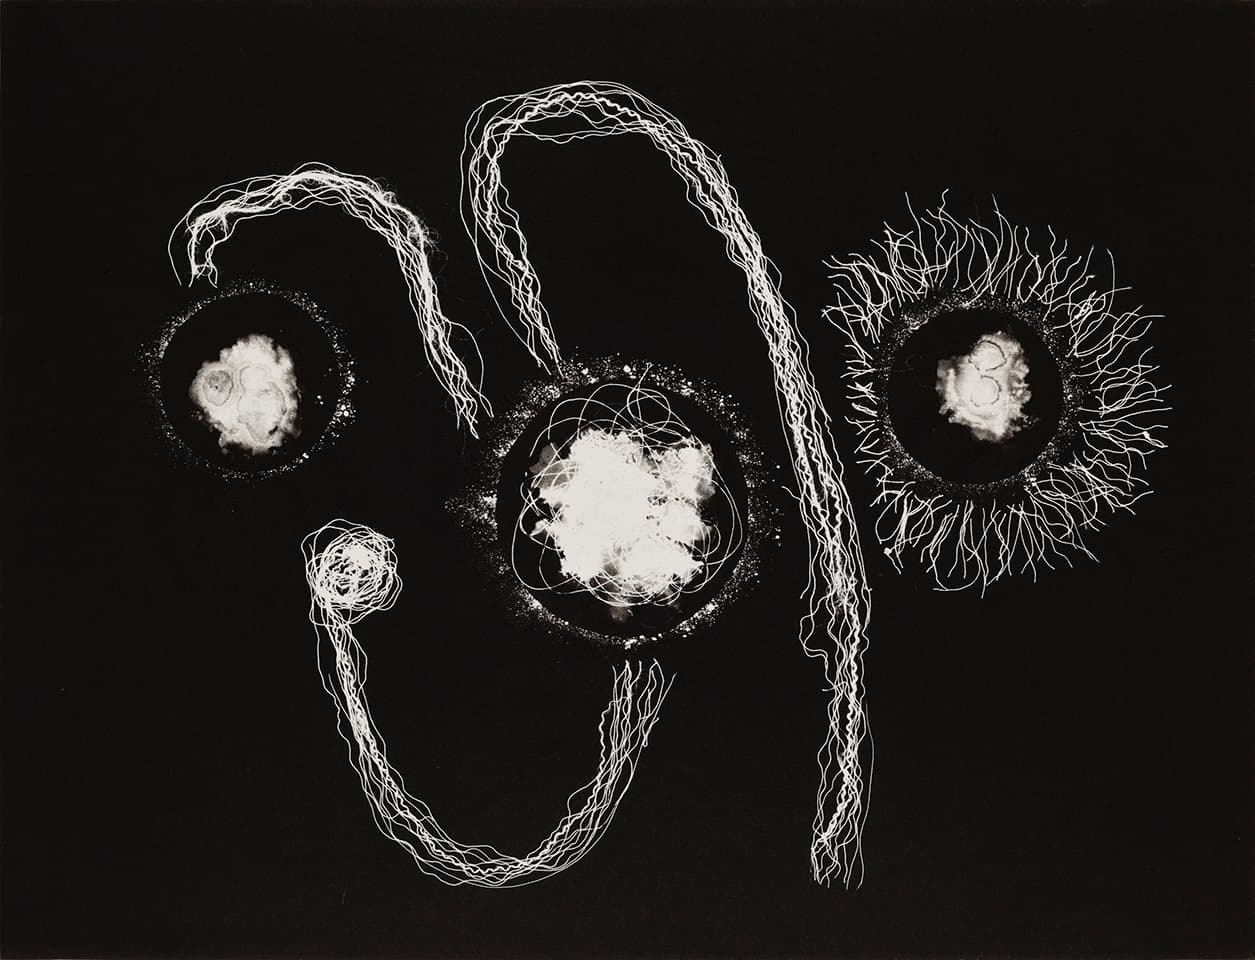 <strong>Heartwork 6</strong>, Susan Aldworth, monoprint, 56 x 76 cms, 2010. Photograph by Peter Abrahams.